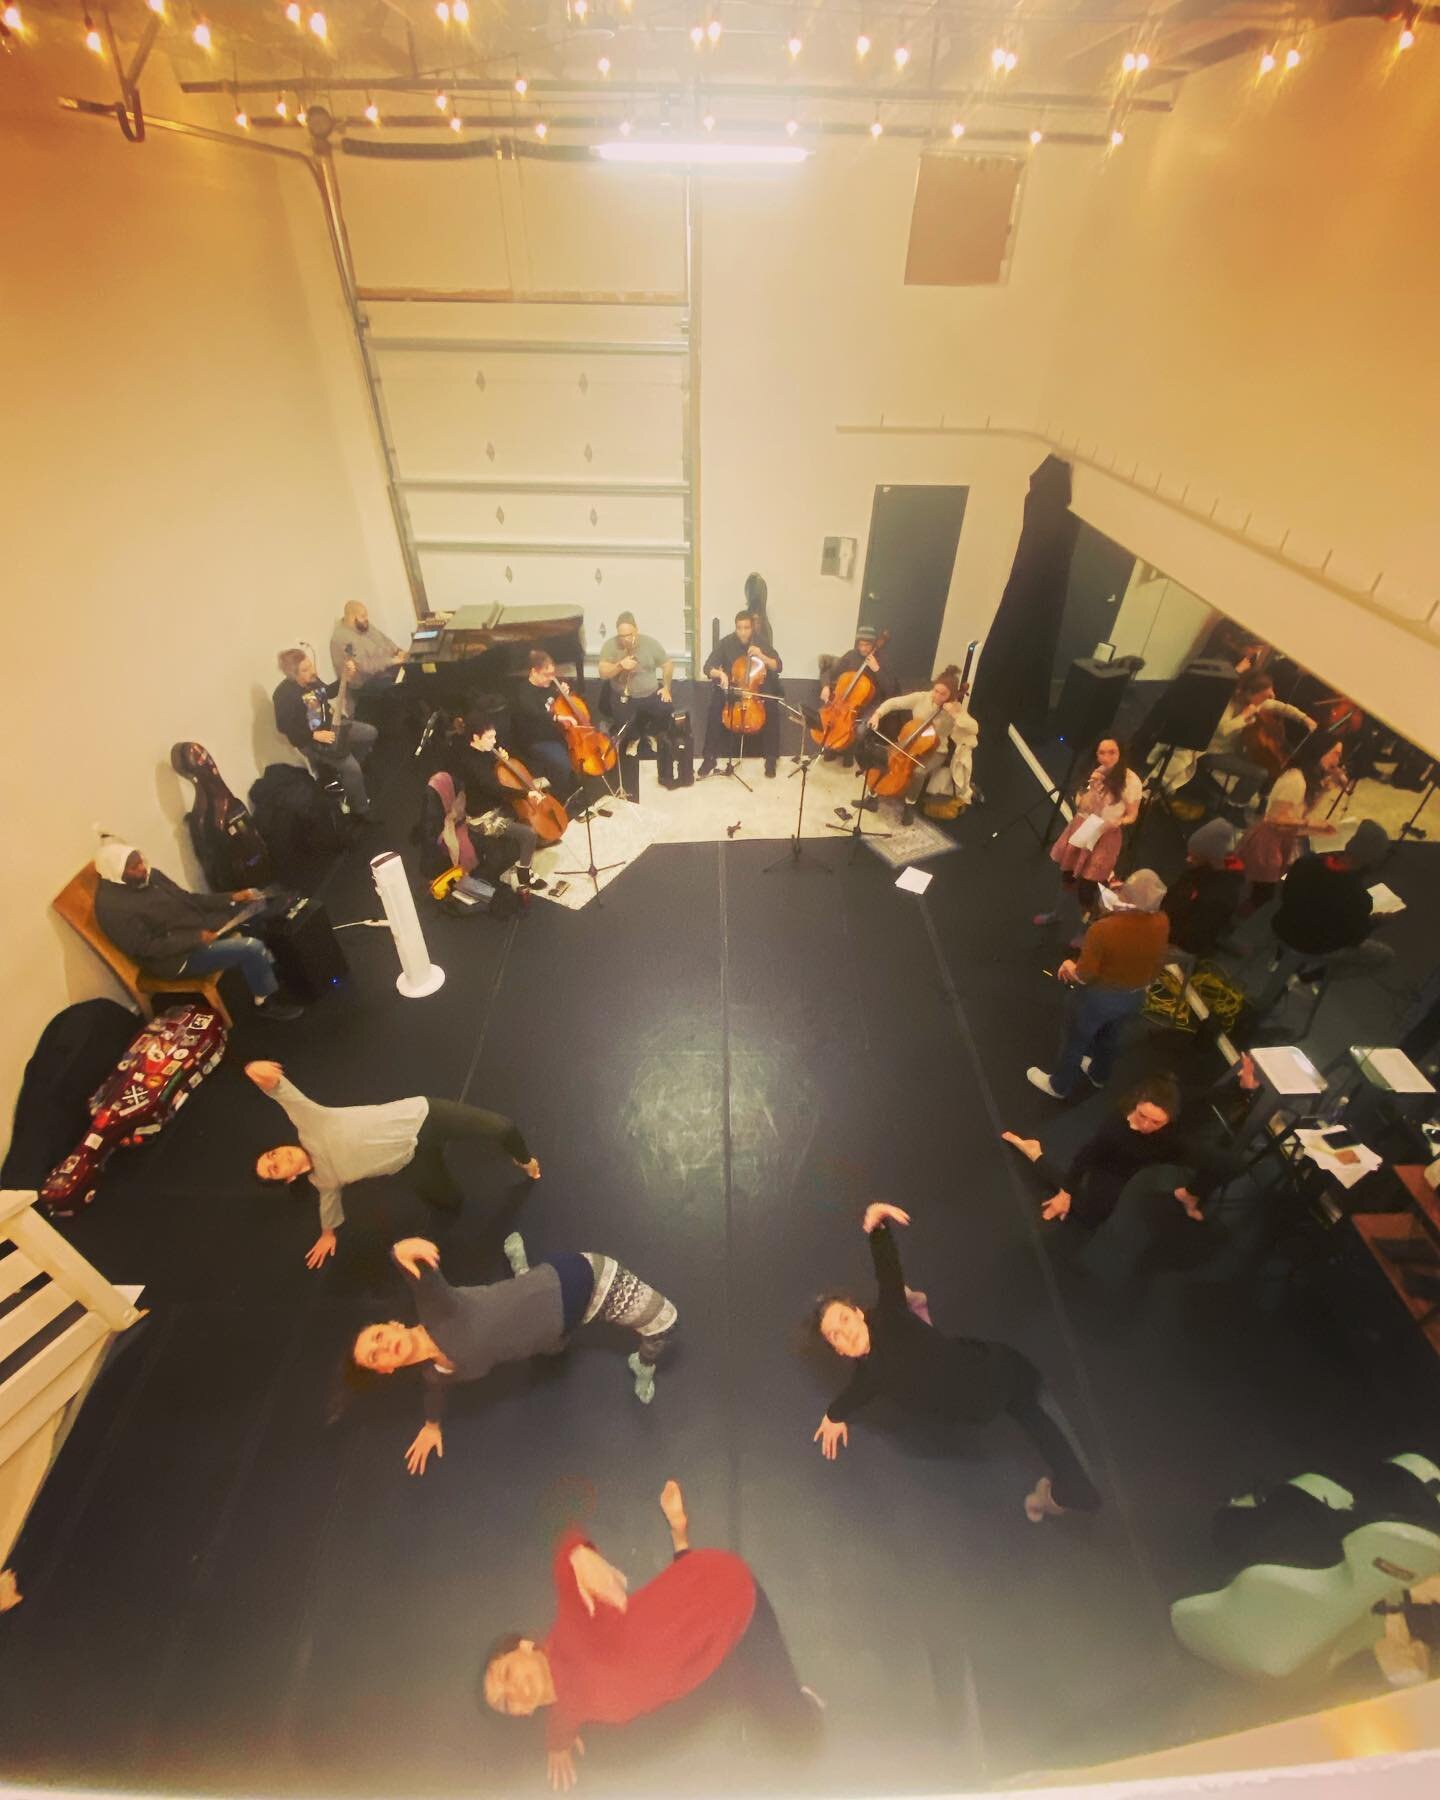 We are so excited and honored to perform with @pdxcelloproject at the @pacalaska this coming weekend for two sold out shows! #momentum #momentumdancecollective #portlandcelloproject #pacalaska